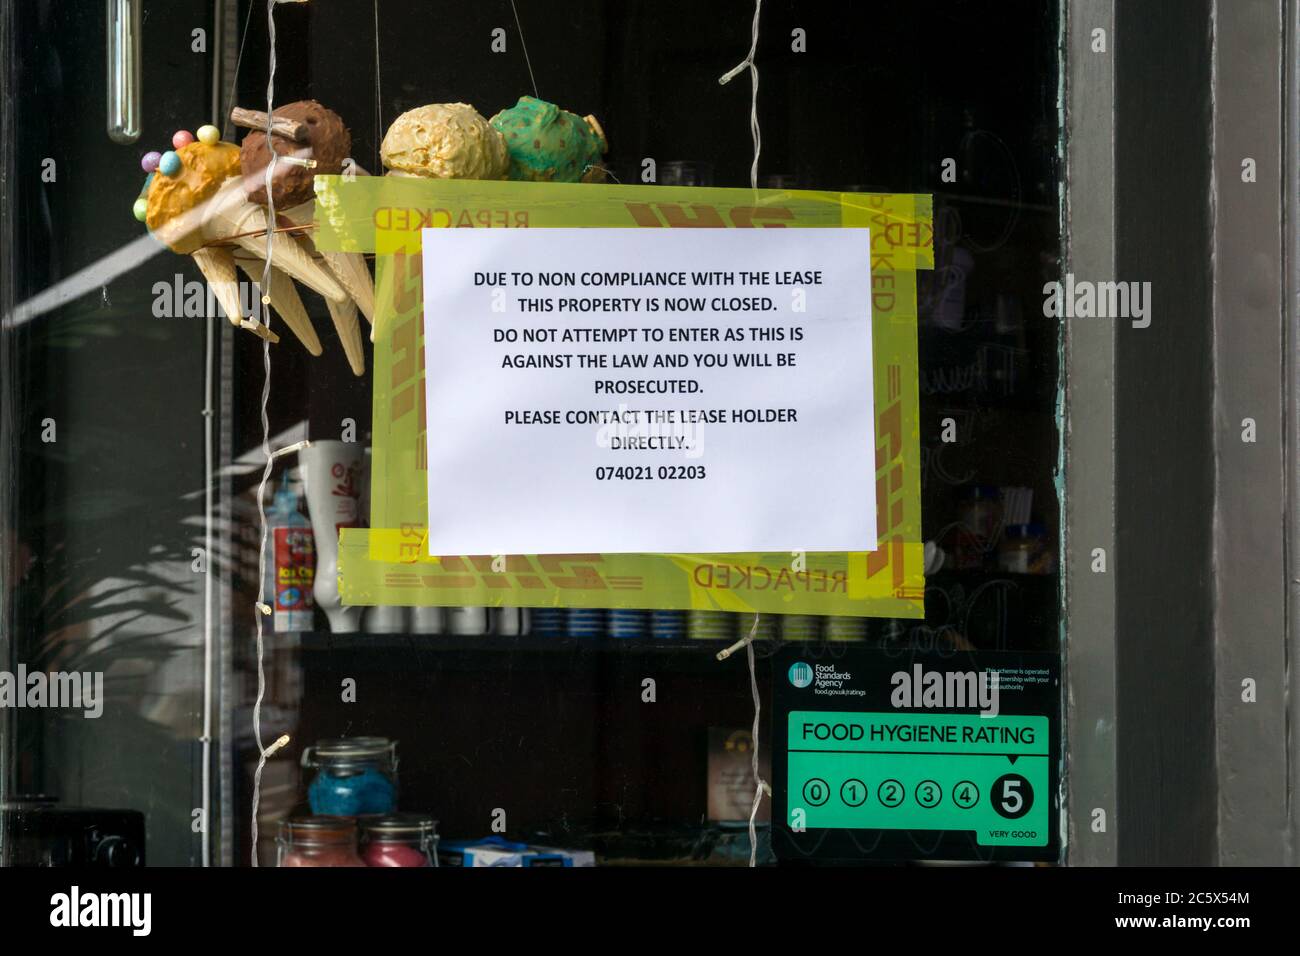 A sign in the window of a leasehold shop that has been repossessed for non-compliance with the lease. Stock Photo